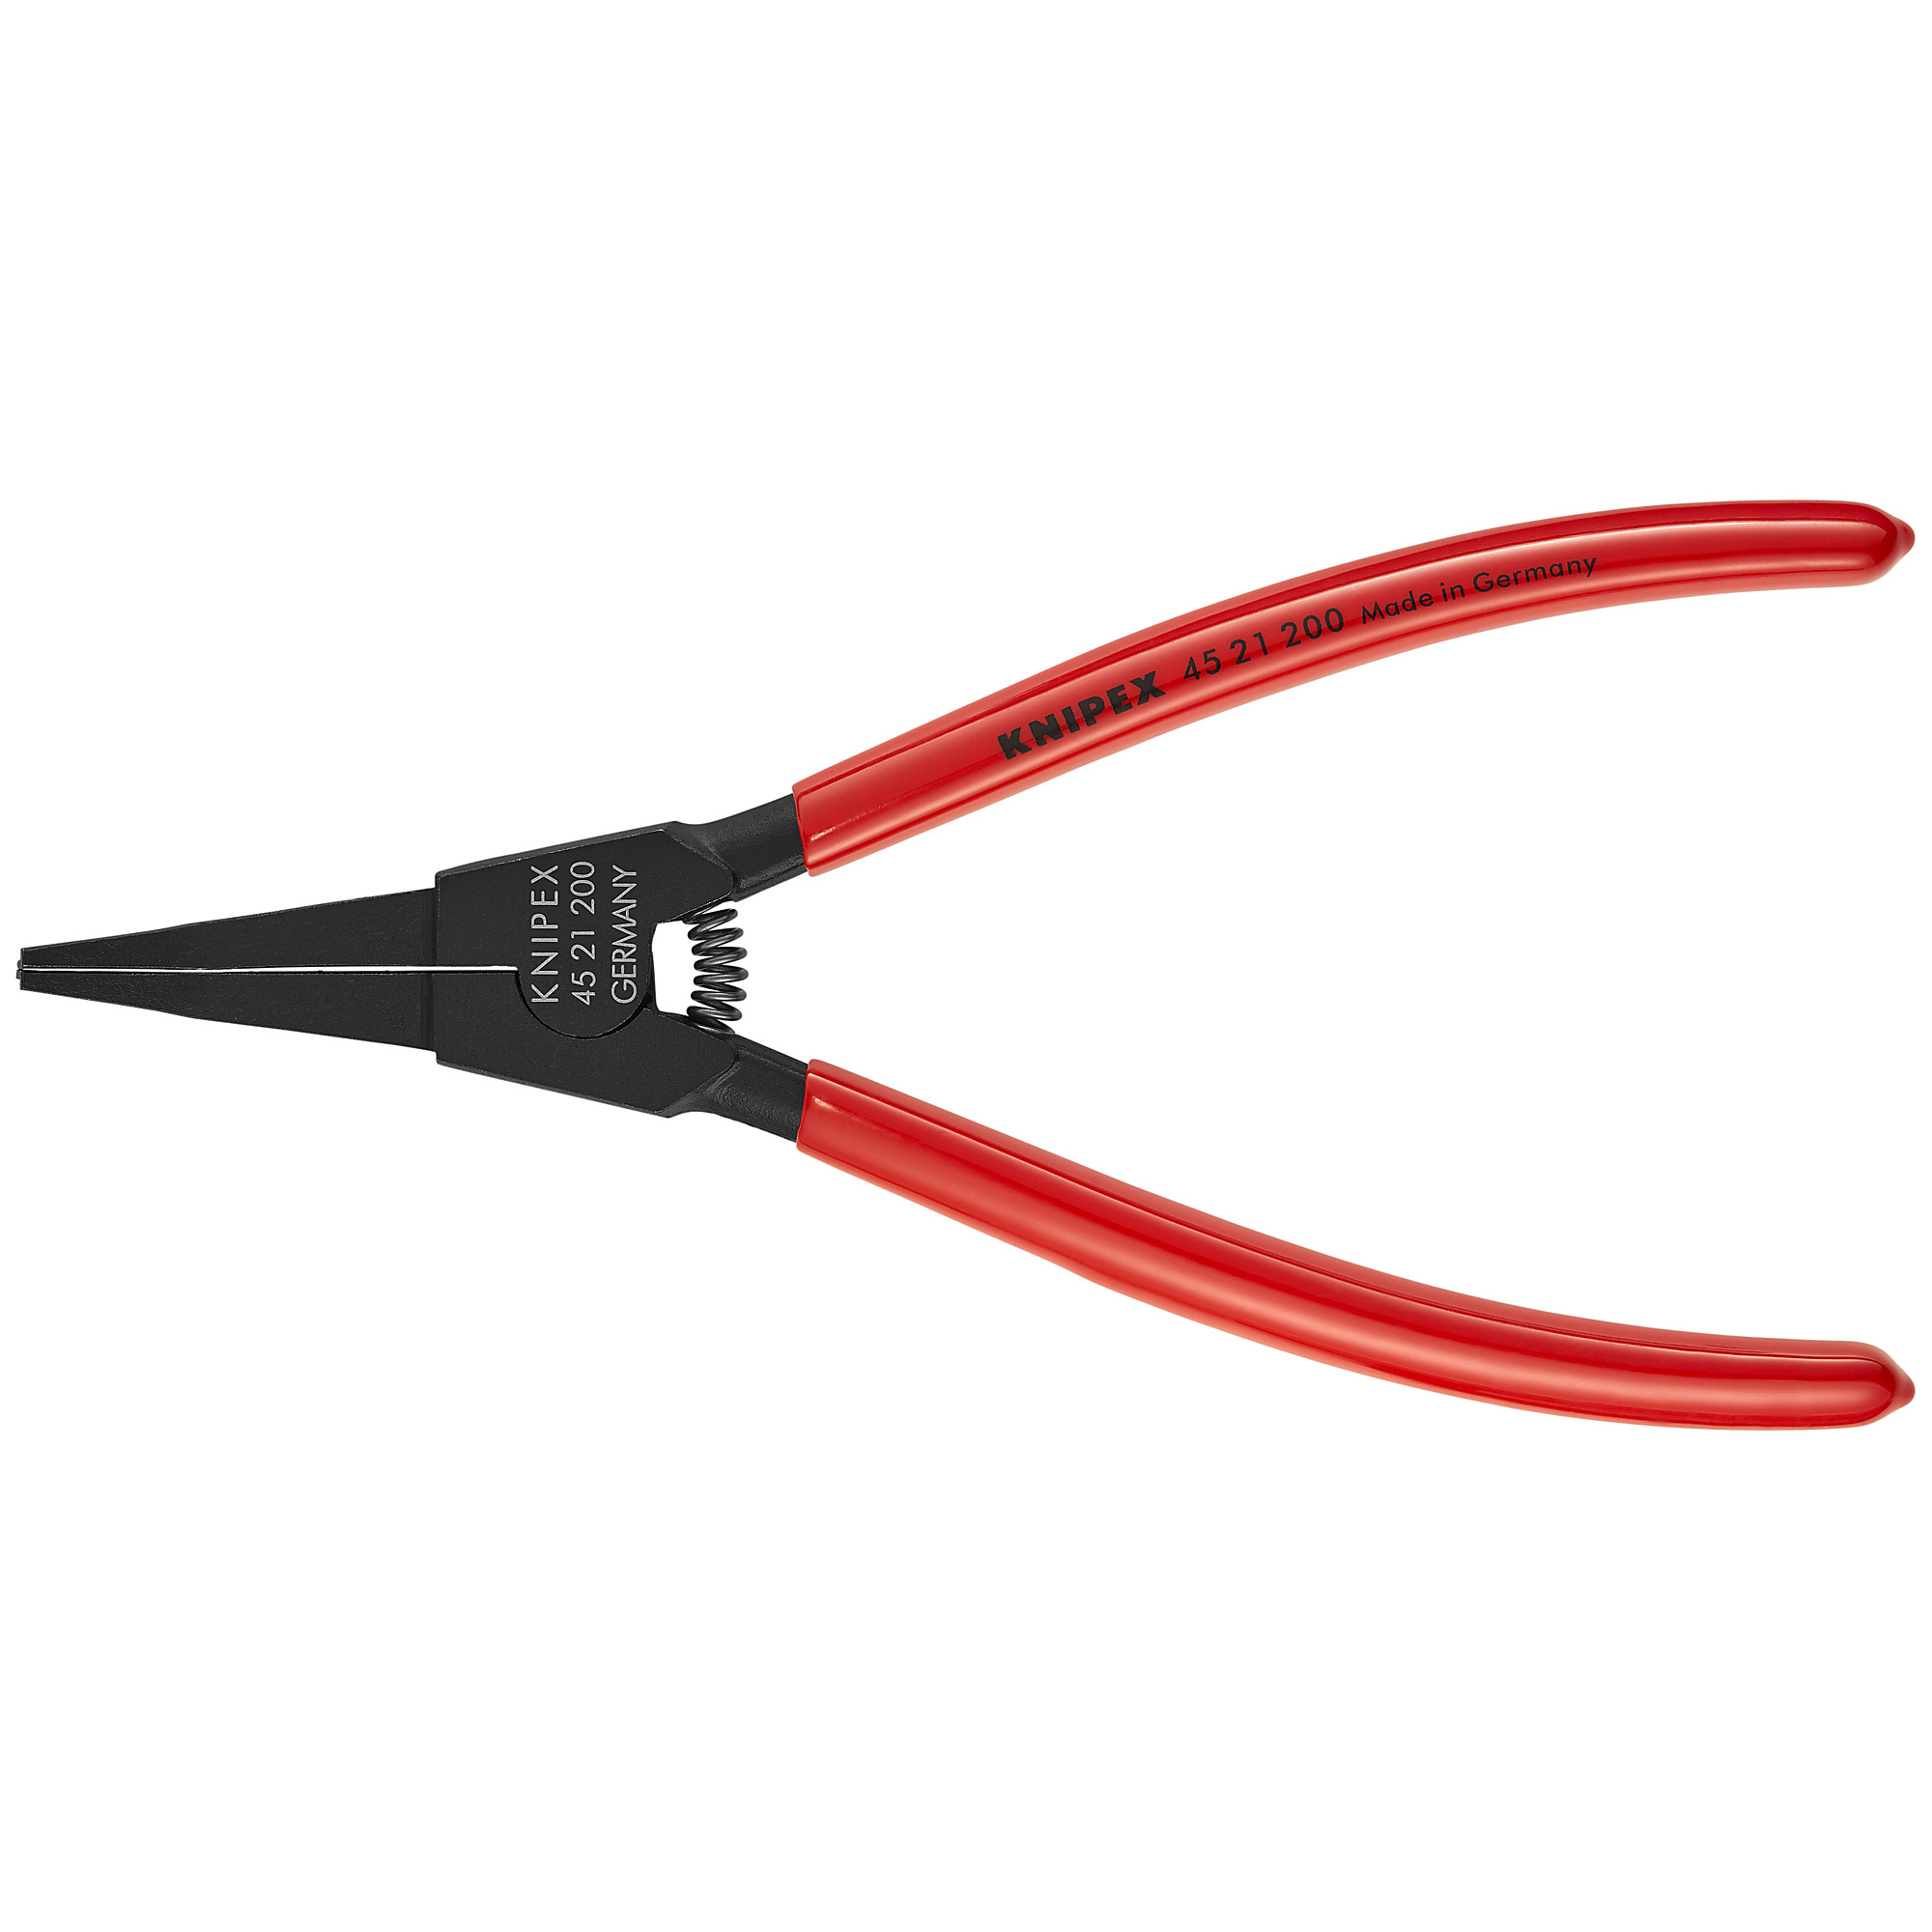 KNIPEX, Retaining Ring Pliers-Shafts, 3/32 tip, 8Inch, Pieces (qty.) 1 Material Steel, Model 45 21 200